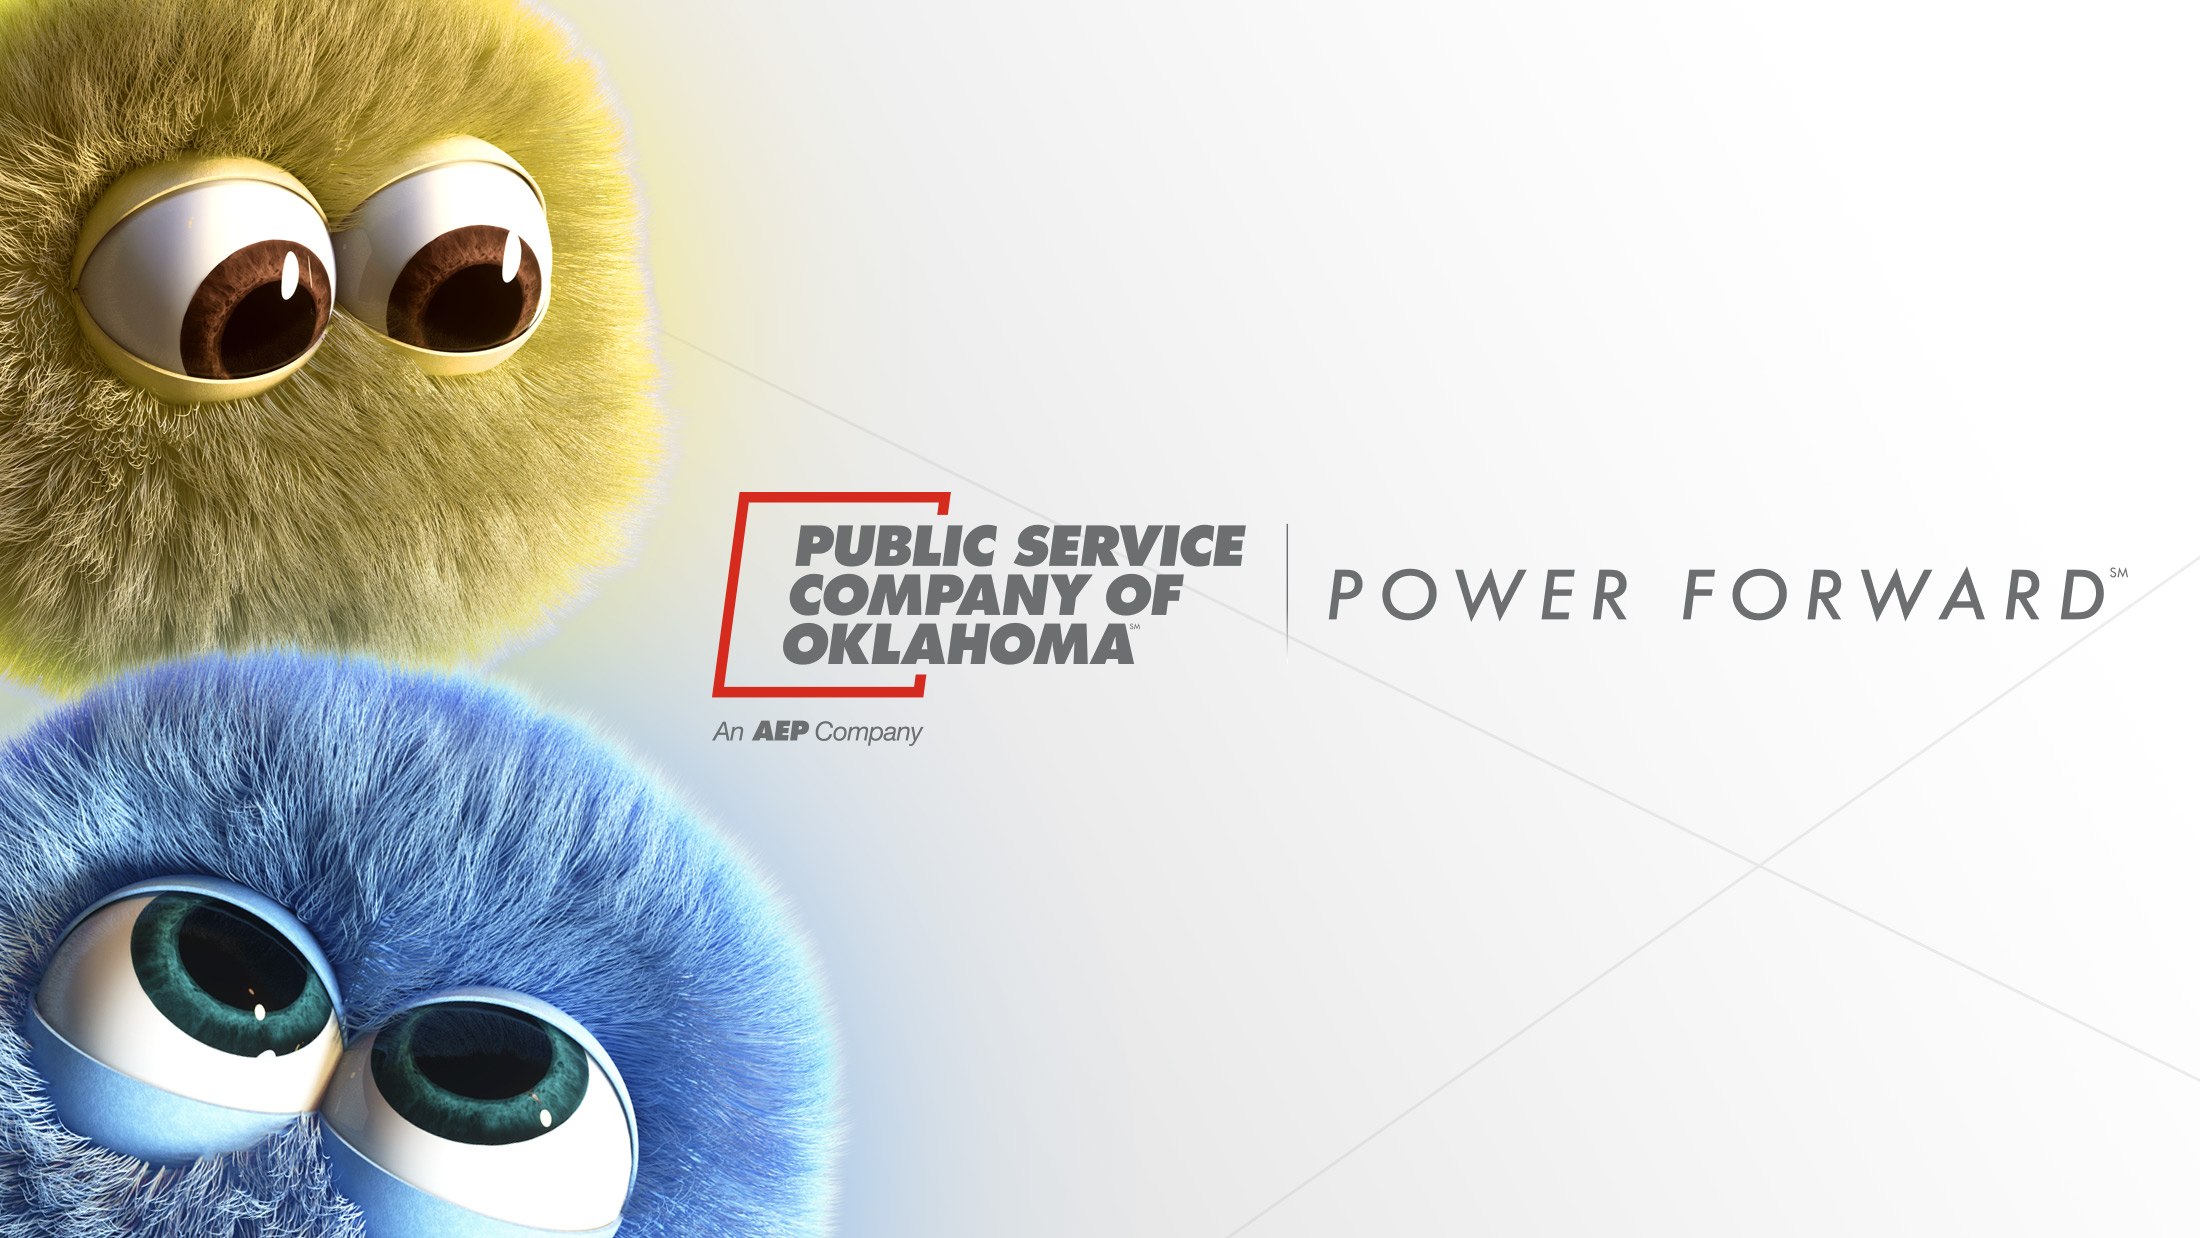 Branding and creative for PSO Power Forward